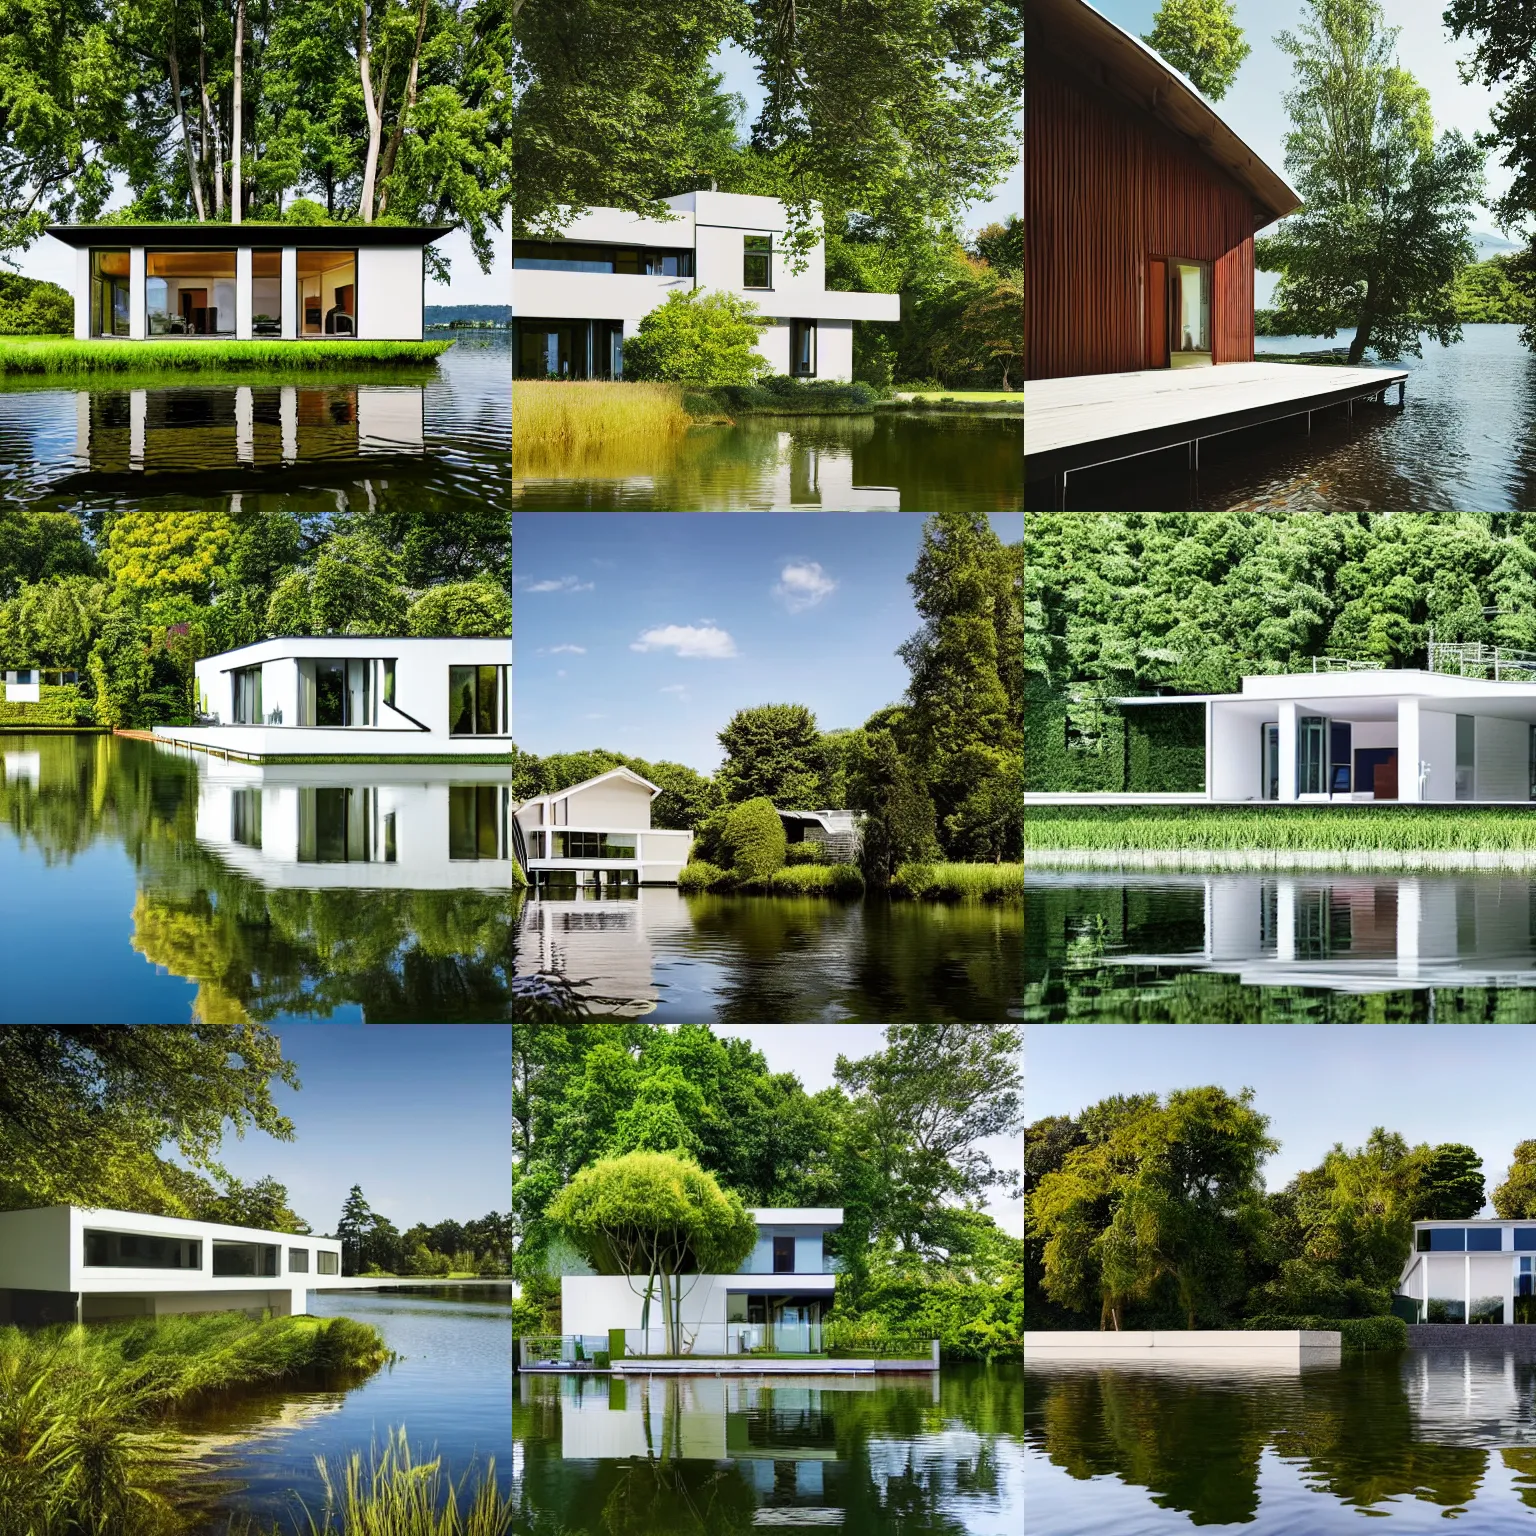 Prompt: architectural digest photo, wide angle, frontal view of house, bauhaus style house by a lake, summer, single floor, flat roof, patio, lush vegetation, trees bushes, plants, reed, secluded, calm serene relaxed, small dock, rowing boat, bushes, reflection in water, ultra realistic 8 k